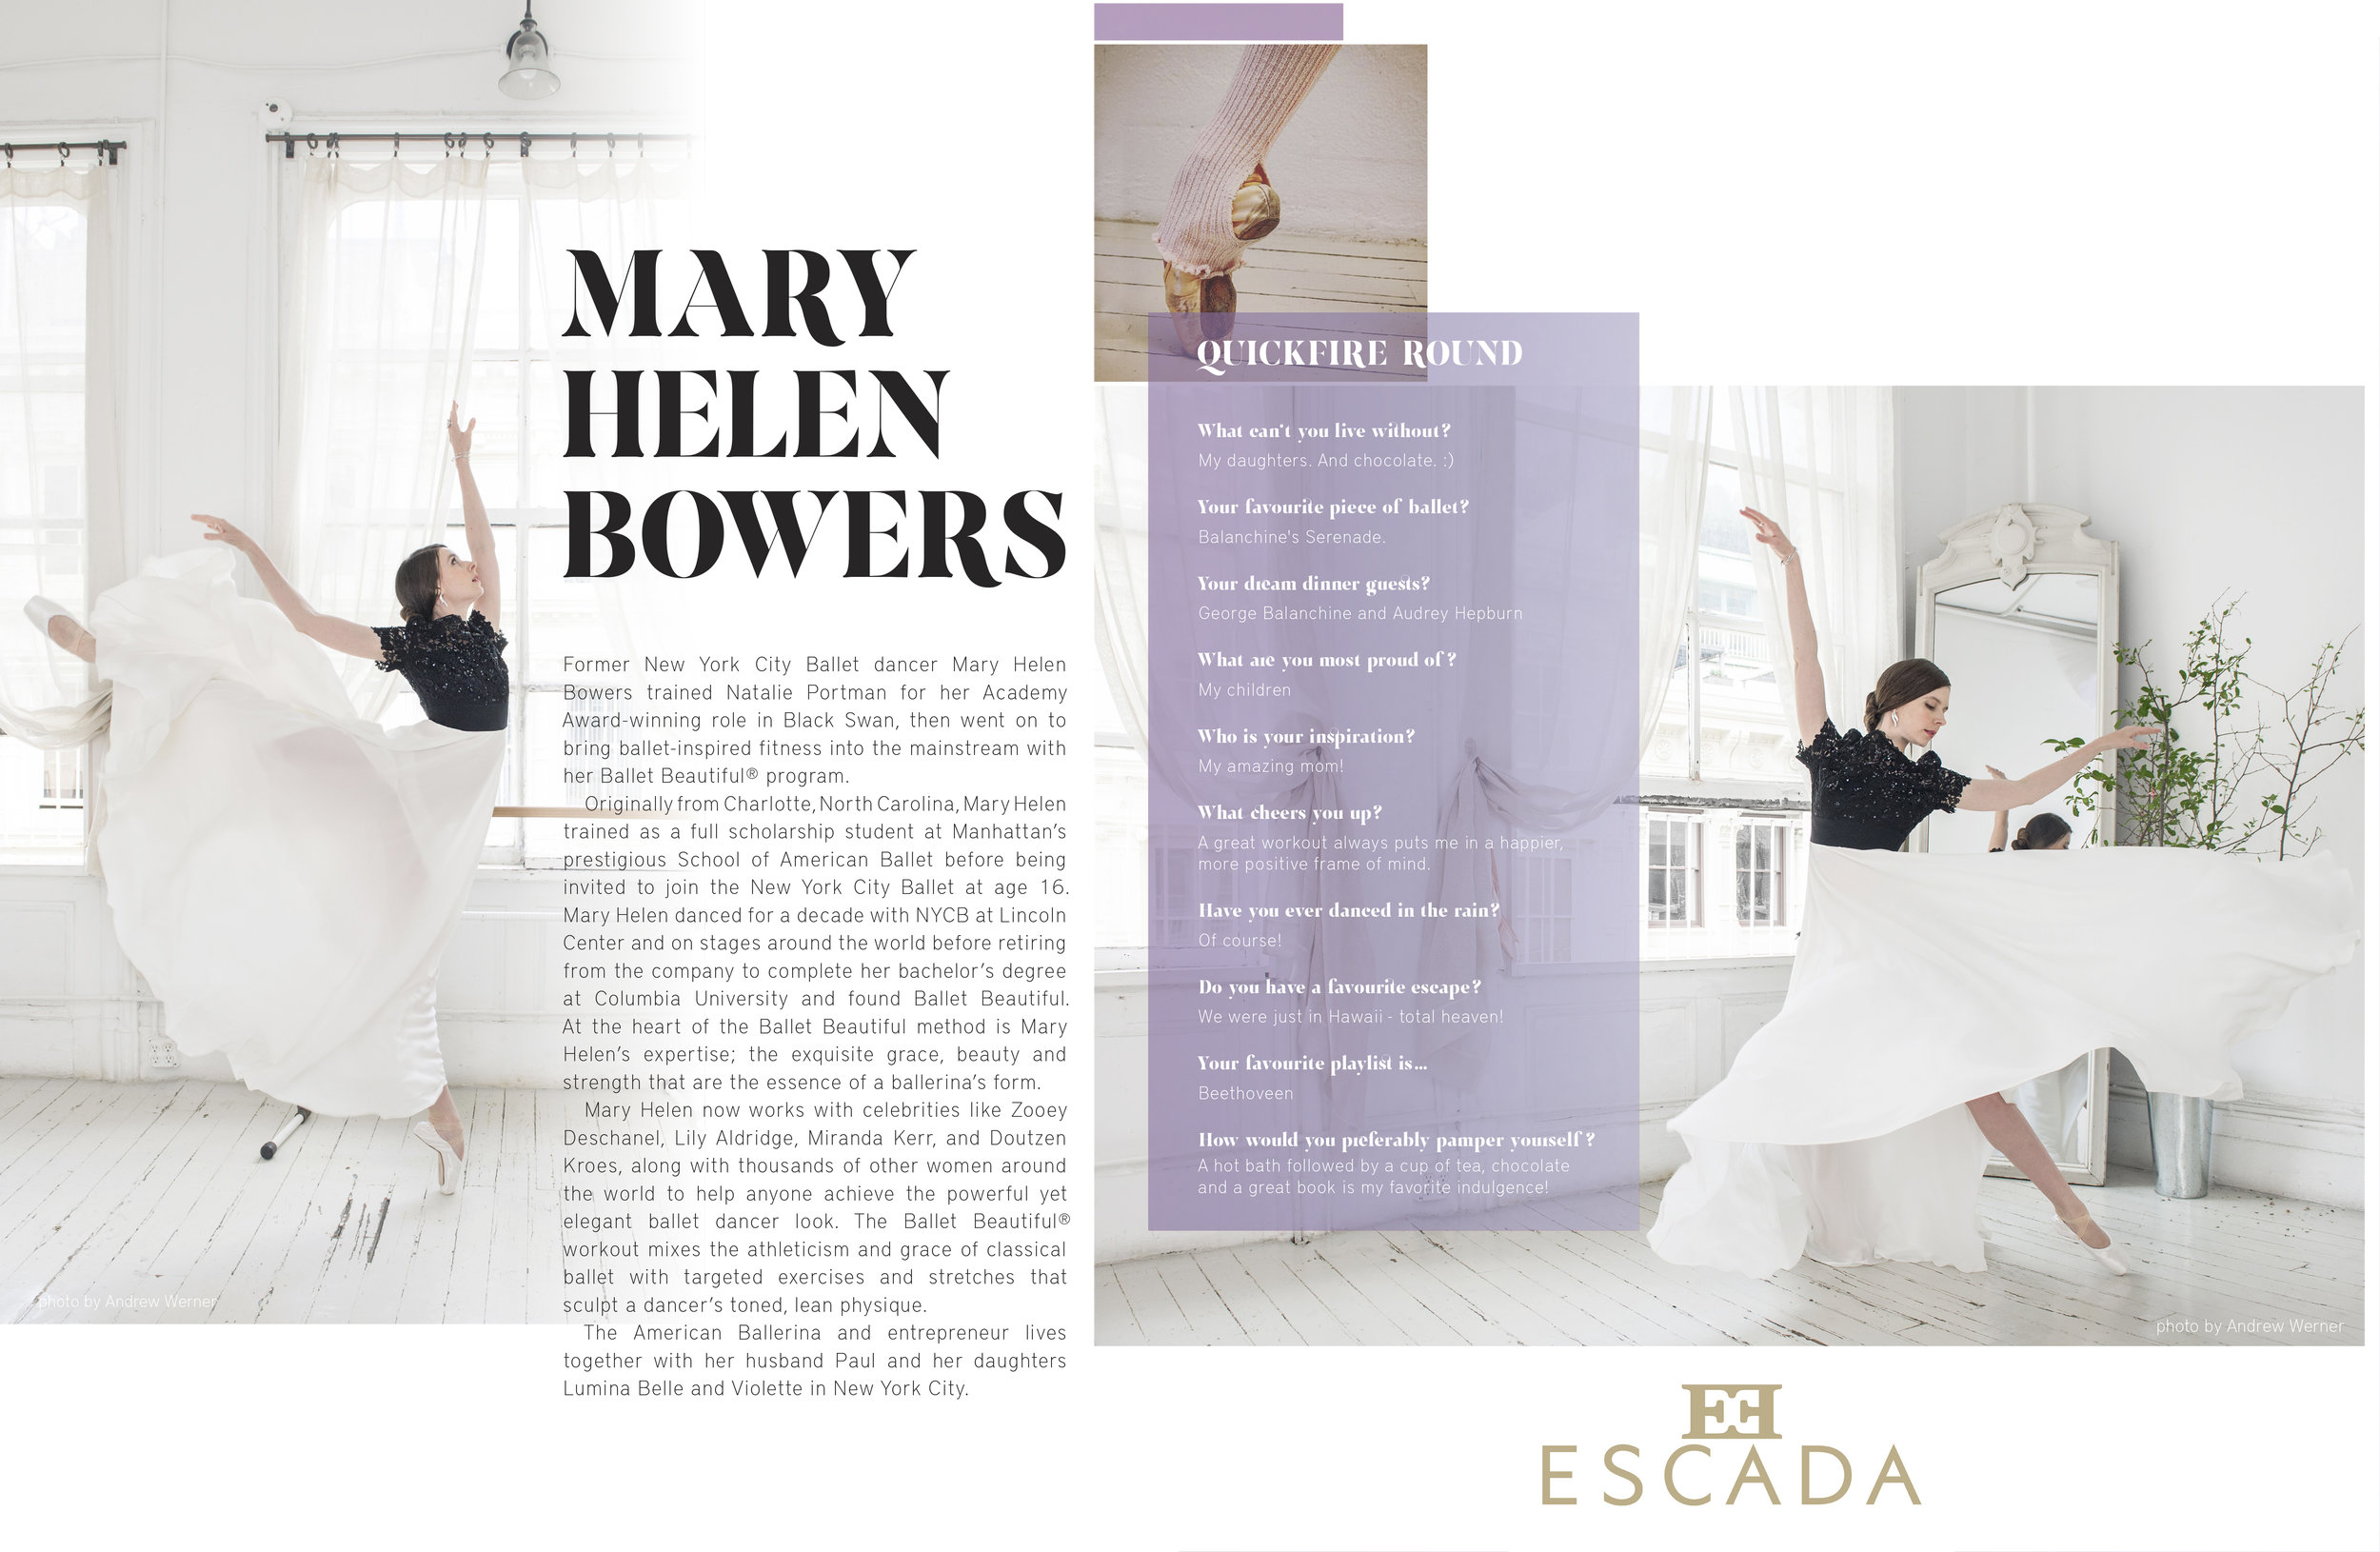 Mary Helen Bowers ESCADA - photo by Andrew Werner.jpg